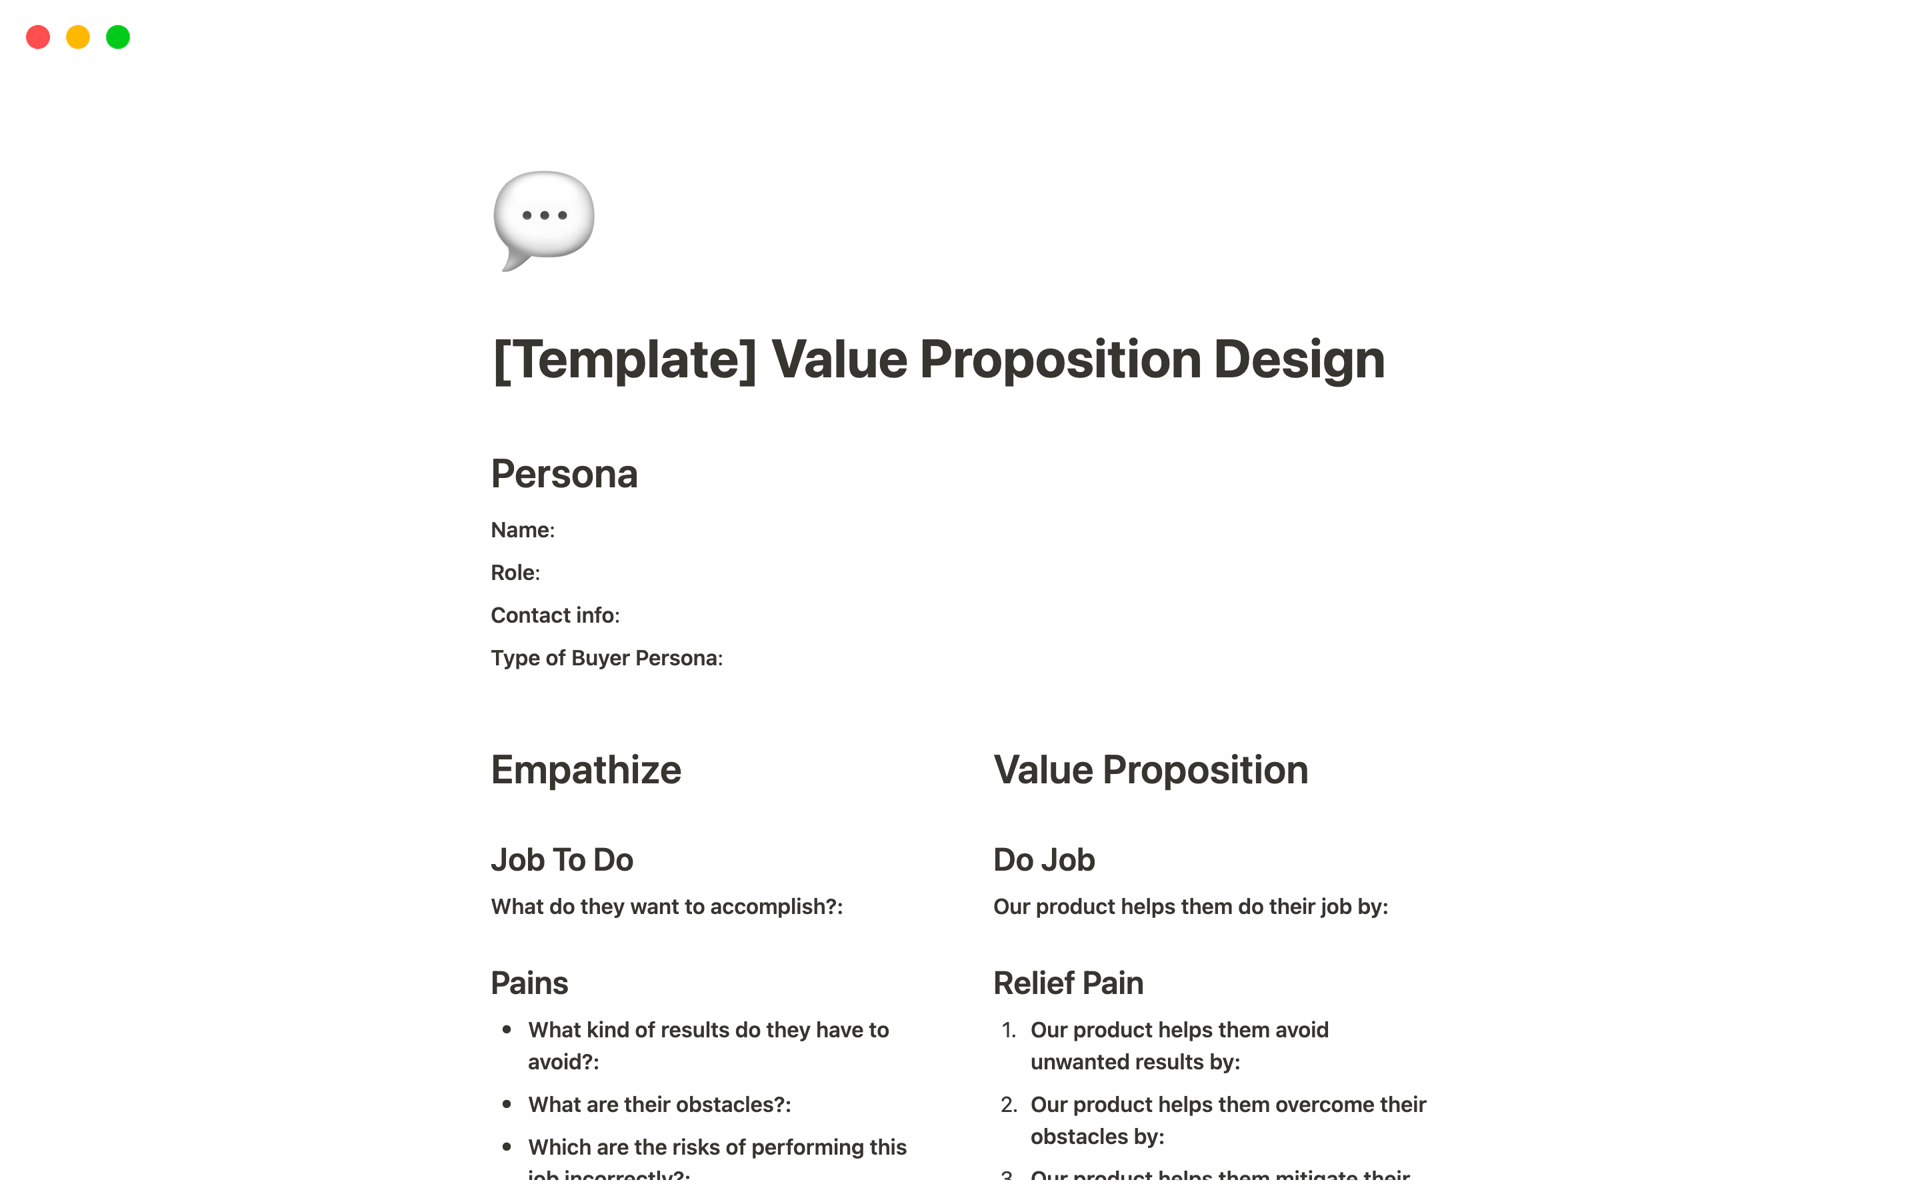 Use when interviewing Buyer Personas and defining your Value Proposition.